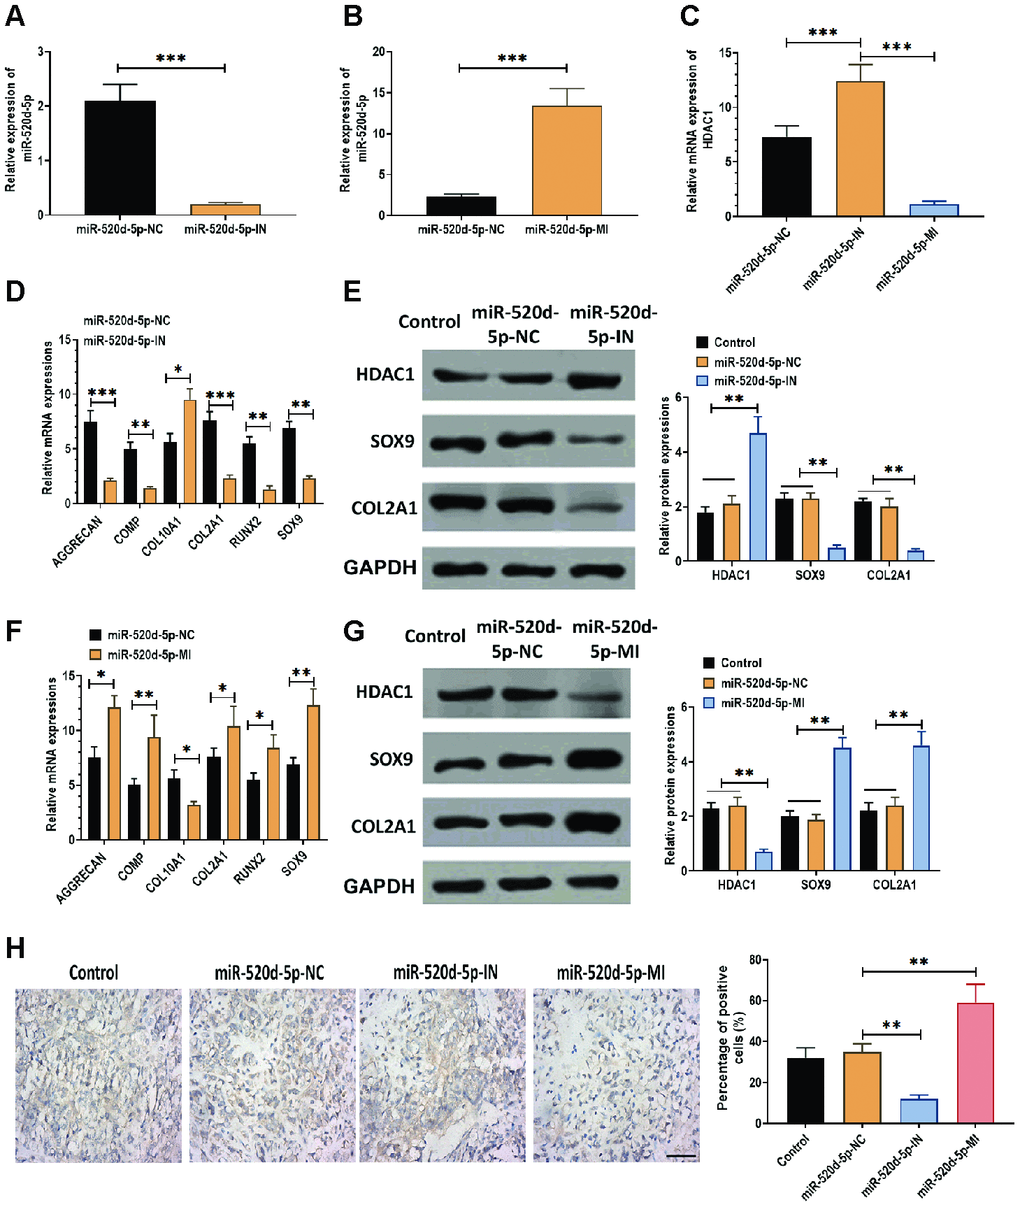 miR-520d-5p affects the expression of HDAC1 in hMSCs during chondrogenesis. In these experiments, hMSCs were transfected with miR-520d-5p inhibitor (miR-520d-5p-IN) or miR-520d-5p mimics (miR-520d-5p-MI) at 0 day and then were induced to differentiate into chondrocytes for 21 days. All experiments were conducted at 21 days after chondrogenic induction. (A, B) Expressions of miR-520d-5p in hMSCs. (C) mRNA expressions of HDAC1 in hMSCs. (D) mRNA expressions of the chondrogenic markers AGGRECAN, COMP, COL2A1, and SOX9 and the hypertrophic markers COL10A1 and RUNX2 in hMSCs transfected with miR-520d-5p-IN at 0 days of chondrogenesis. (E) Protein expressions of HDAC1, SOX9, and COL2A1 in hMSCs transfected with miR-520d-5p-IN at 0 days of chondrogenesis. (F) mRNA expressions of the chondrogenic markers AGGRECAN, COMP, COL2A1, and SOX9 and the hypertrophic markers COL10A1 and RUNX2 in hMSCs transfected with miR-520d-5p-MI at 0 days of chondrogenesis. (G) Protein expressions of HDAC1, SOX9, and COL2A1 in hMSCs transfected with miR-520d-5p-MI at 0 days of chondrogenesis. (H) Immunohistochemistry assay for collagen type II in hMSCs transfected with miR-520d-5p-IN or miR-520d-5p-MI at 0 days of chondrogenesis (16× magnification). Scale bar = 100 μm. For each experiment, at least three replicates were available for the analysis. Data were expressed as mean ± standard deviation (SD). *P 